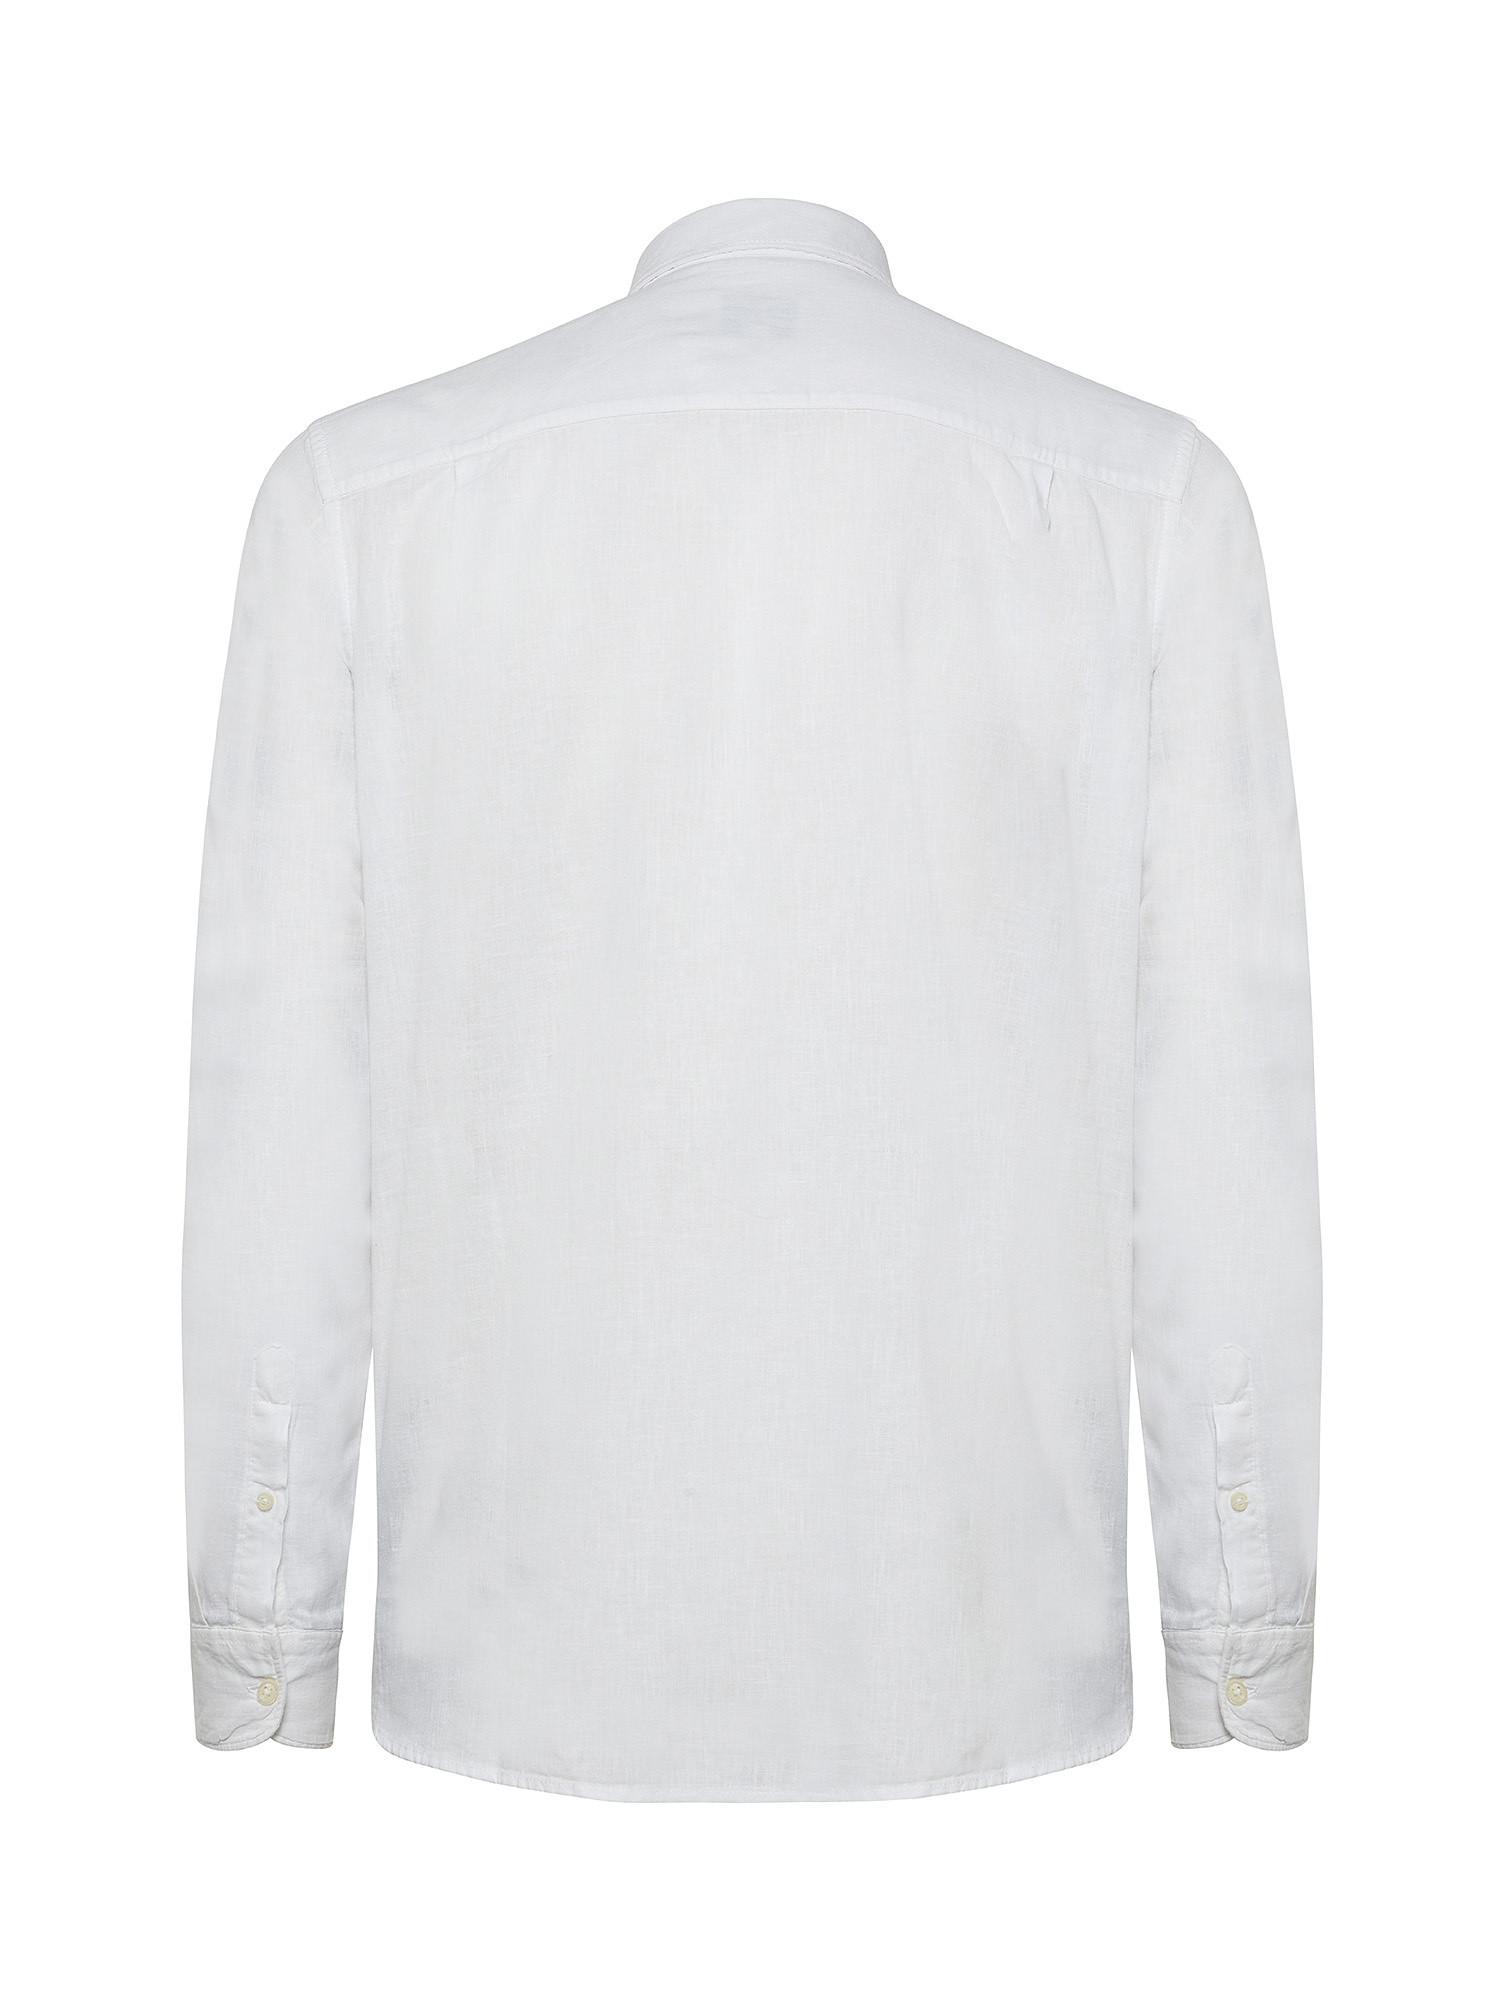 Pepe Jeans - Linen blend shirt, White, large image number 2